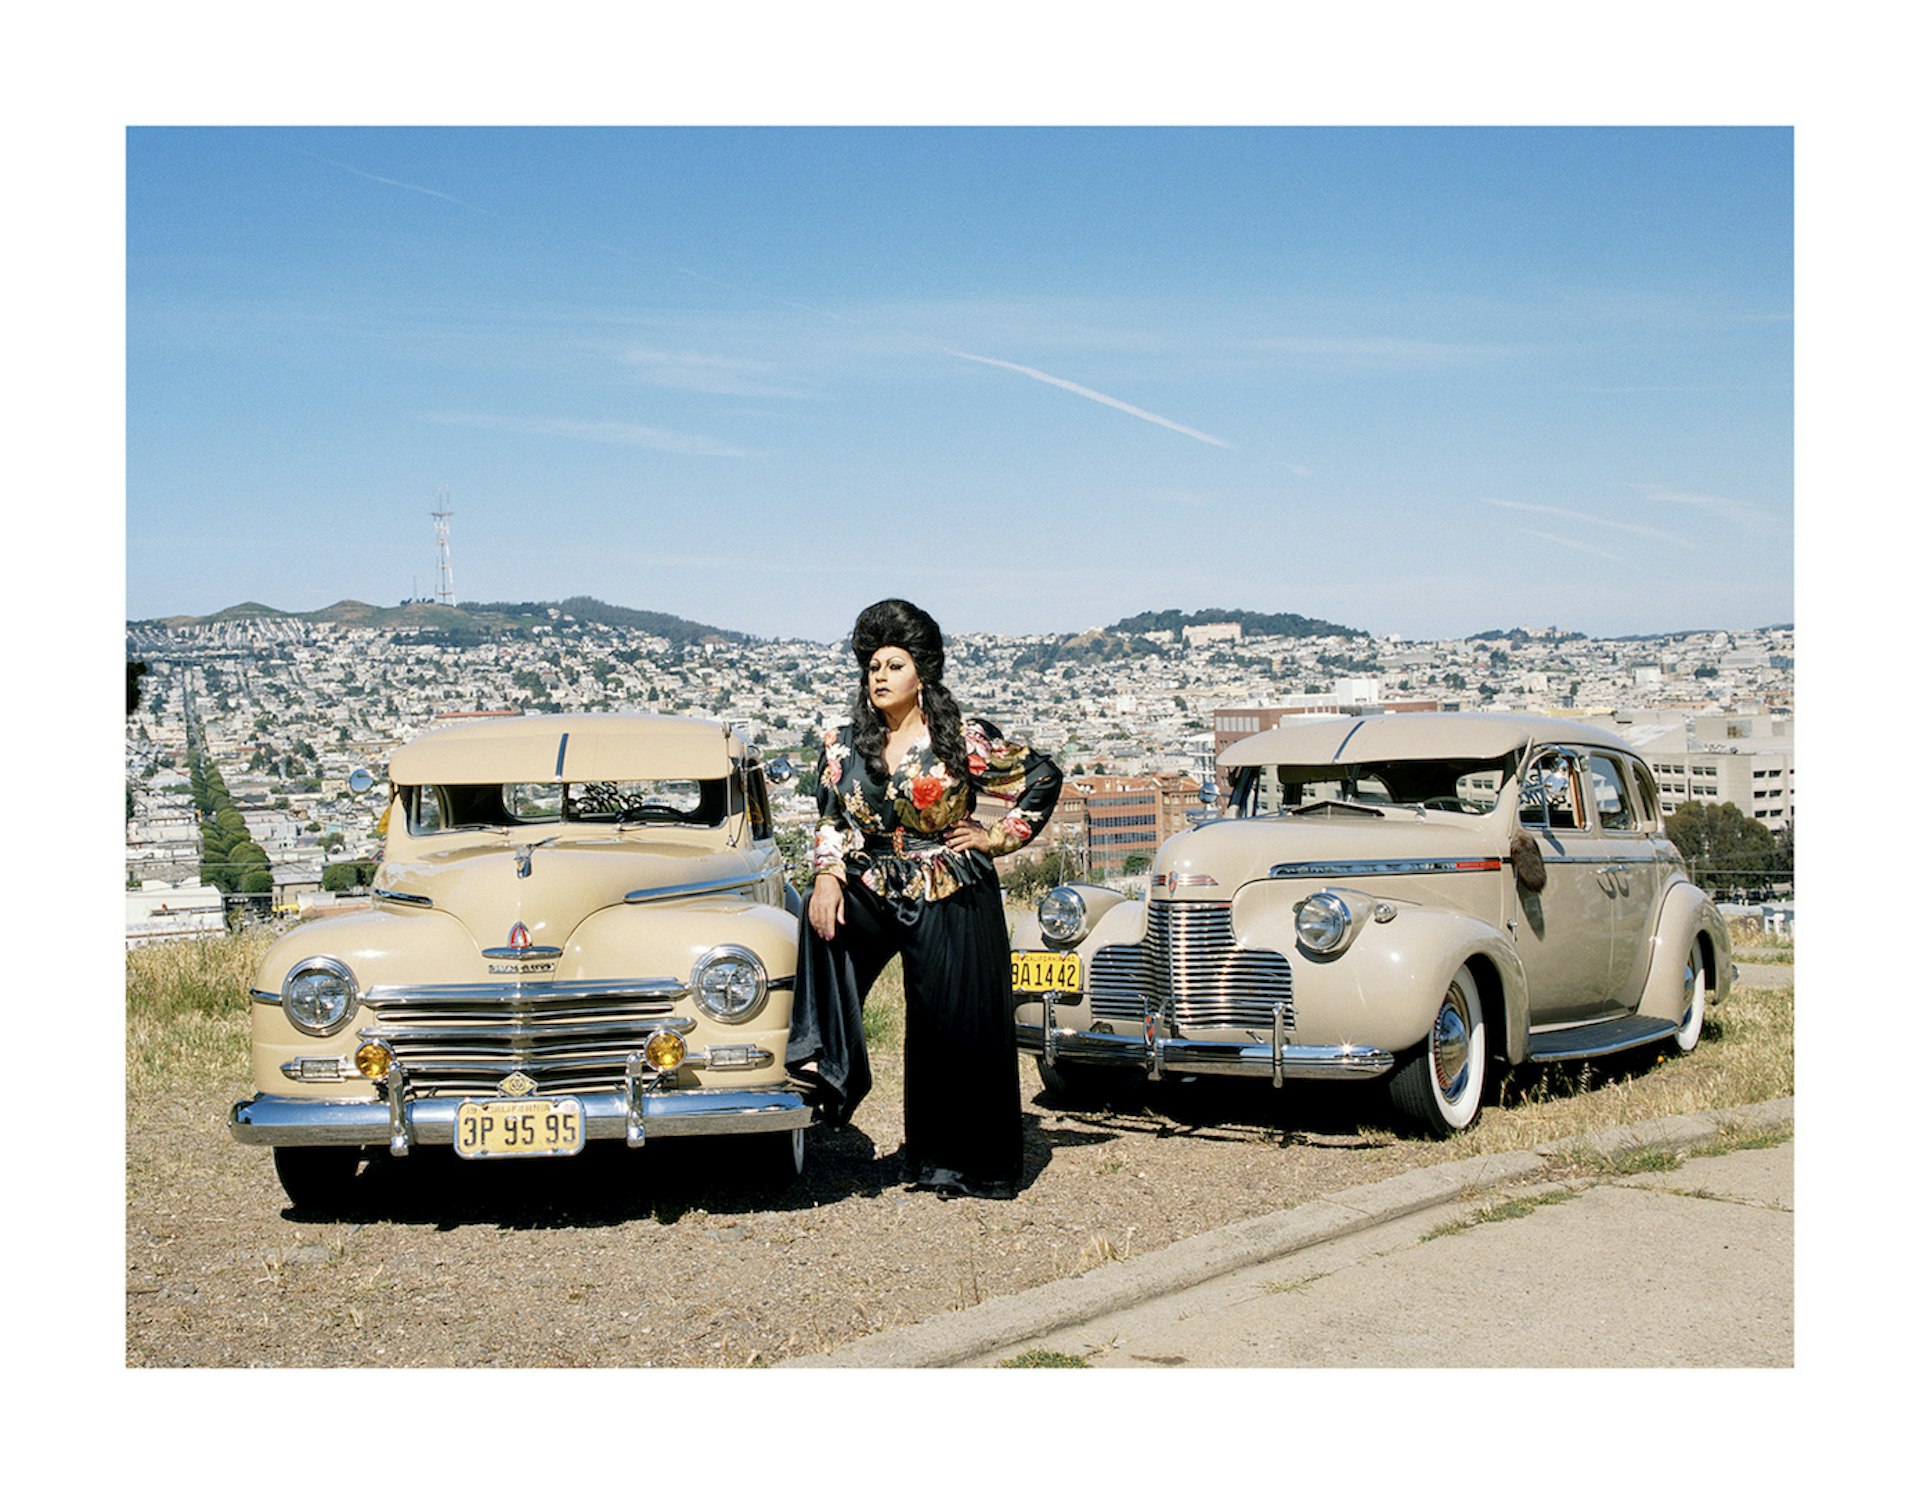 Capturing queerness in San Francisco’s lowrider scene